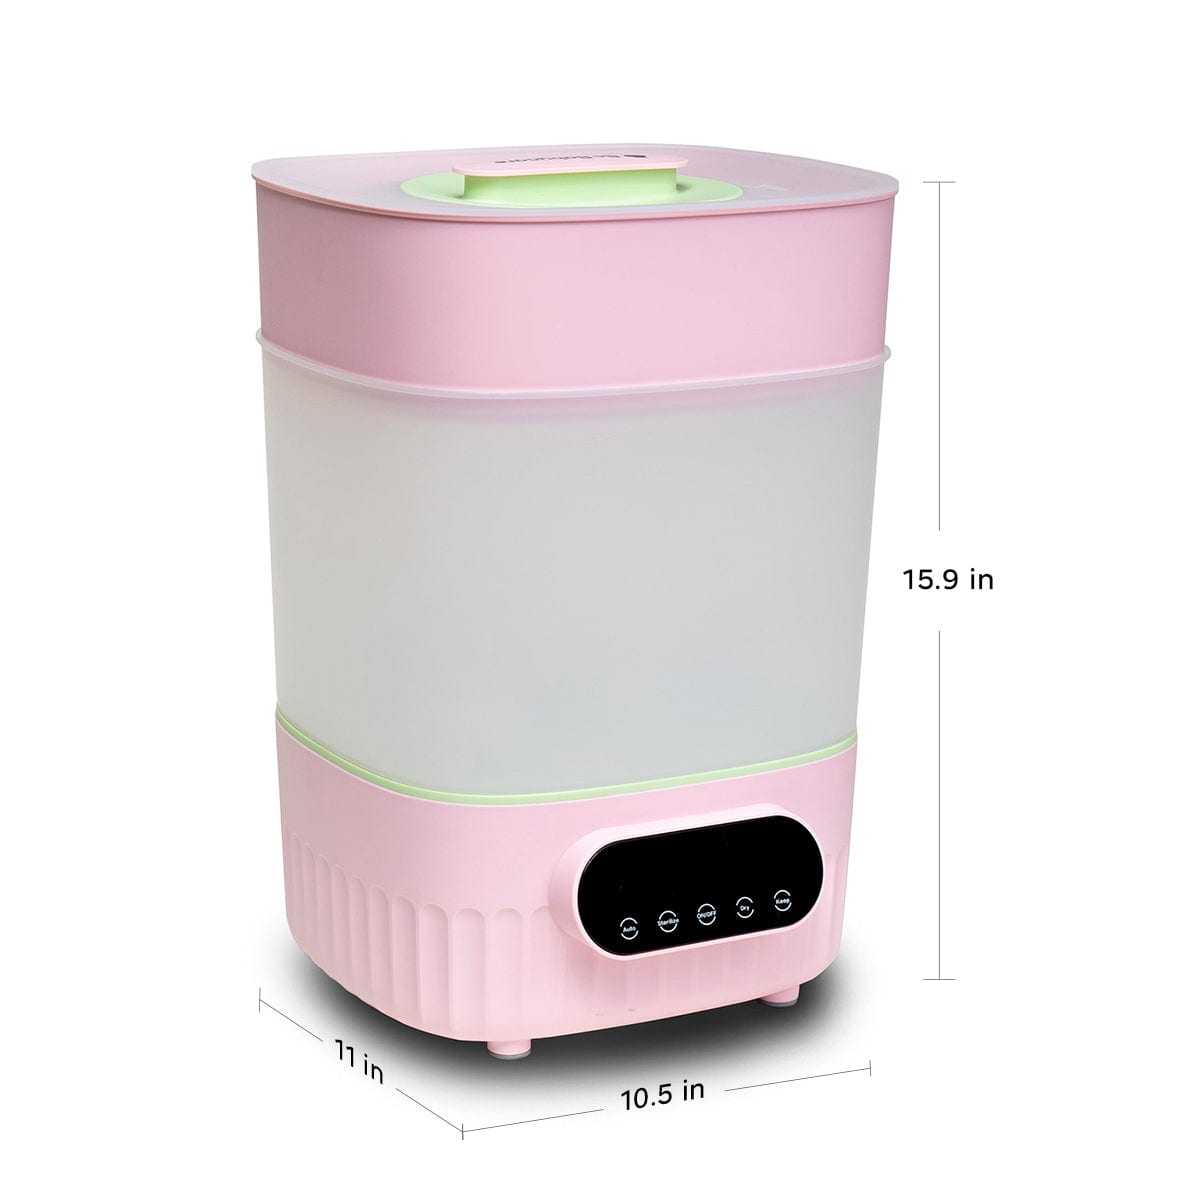 2-in-1 Electric Bottle Sterilizer and Dryer